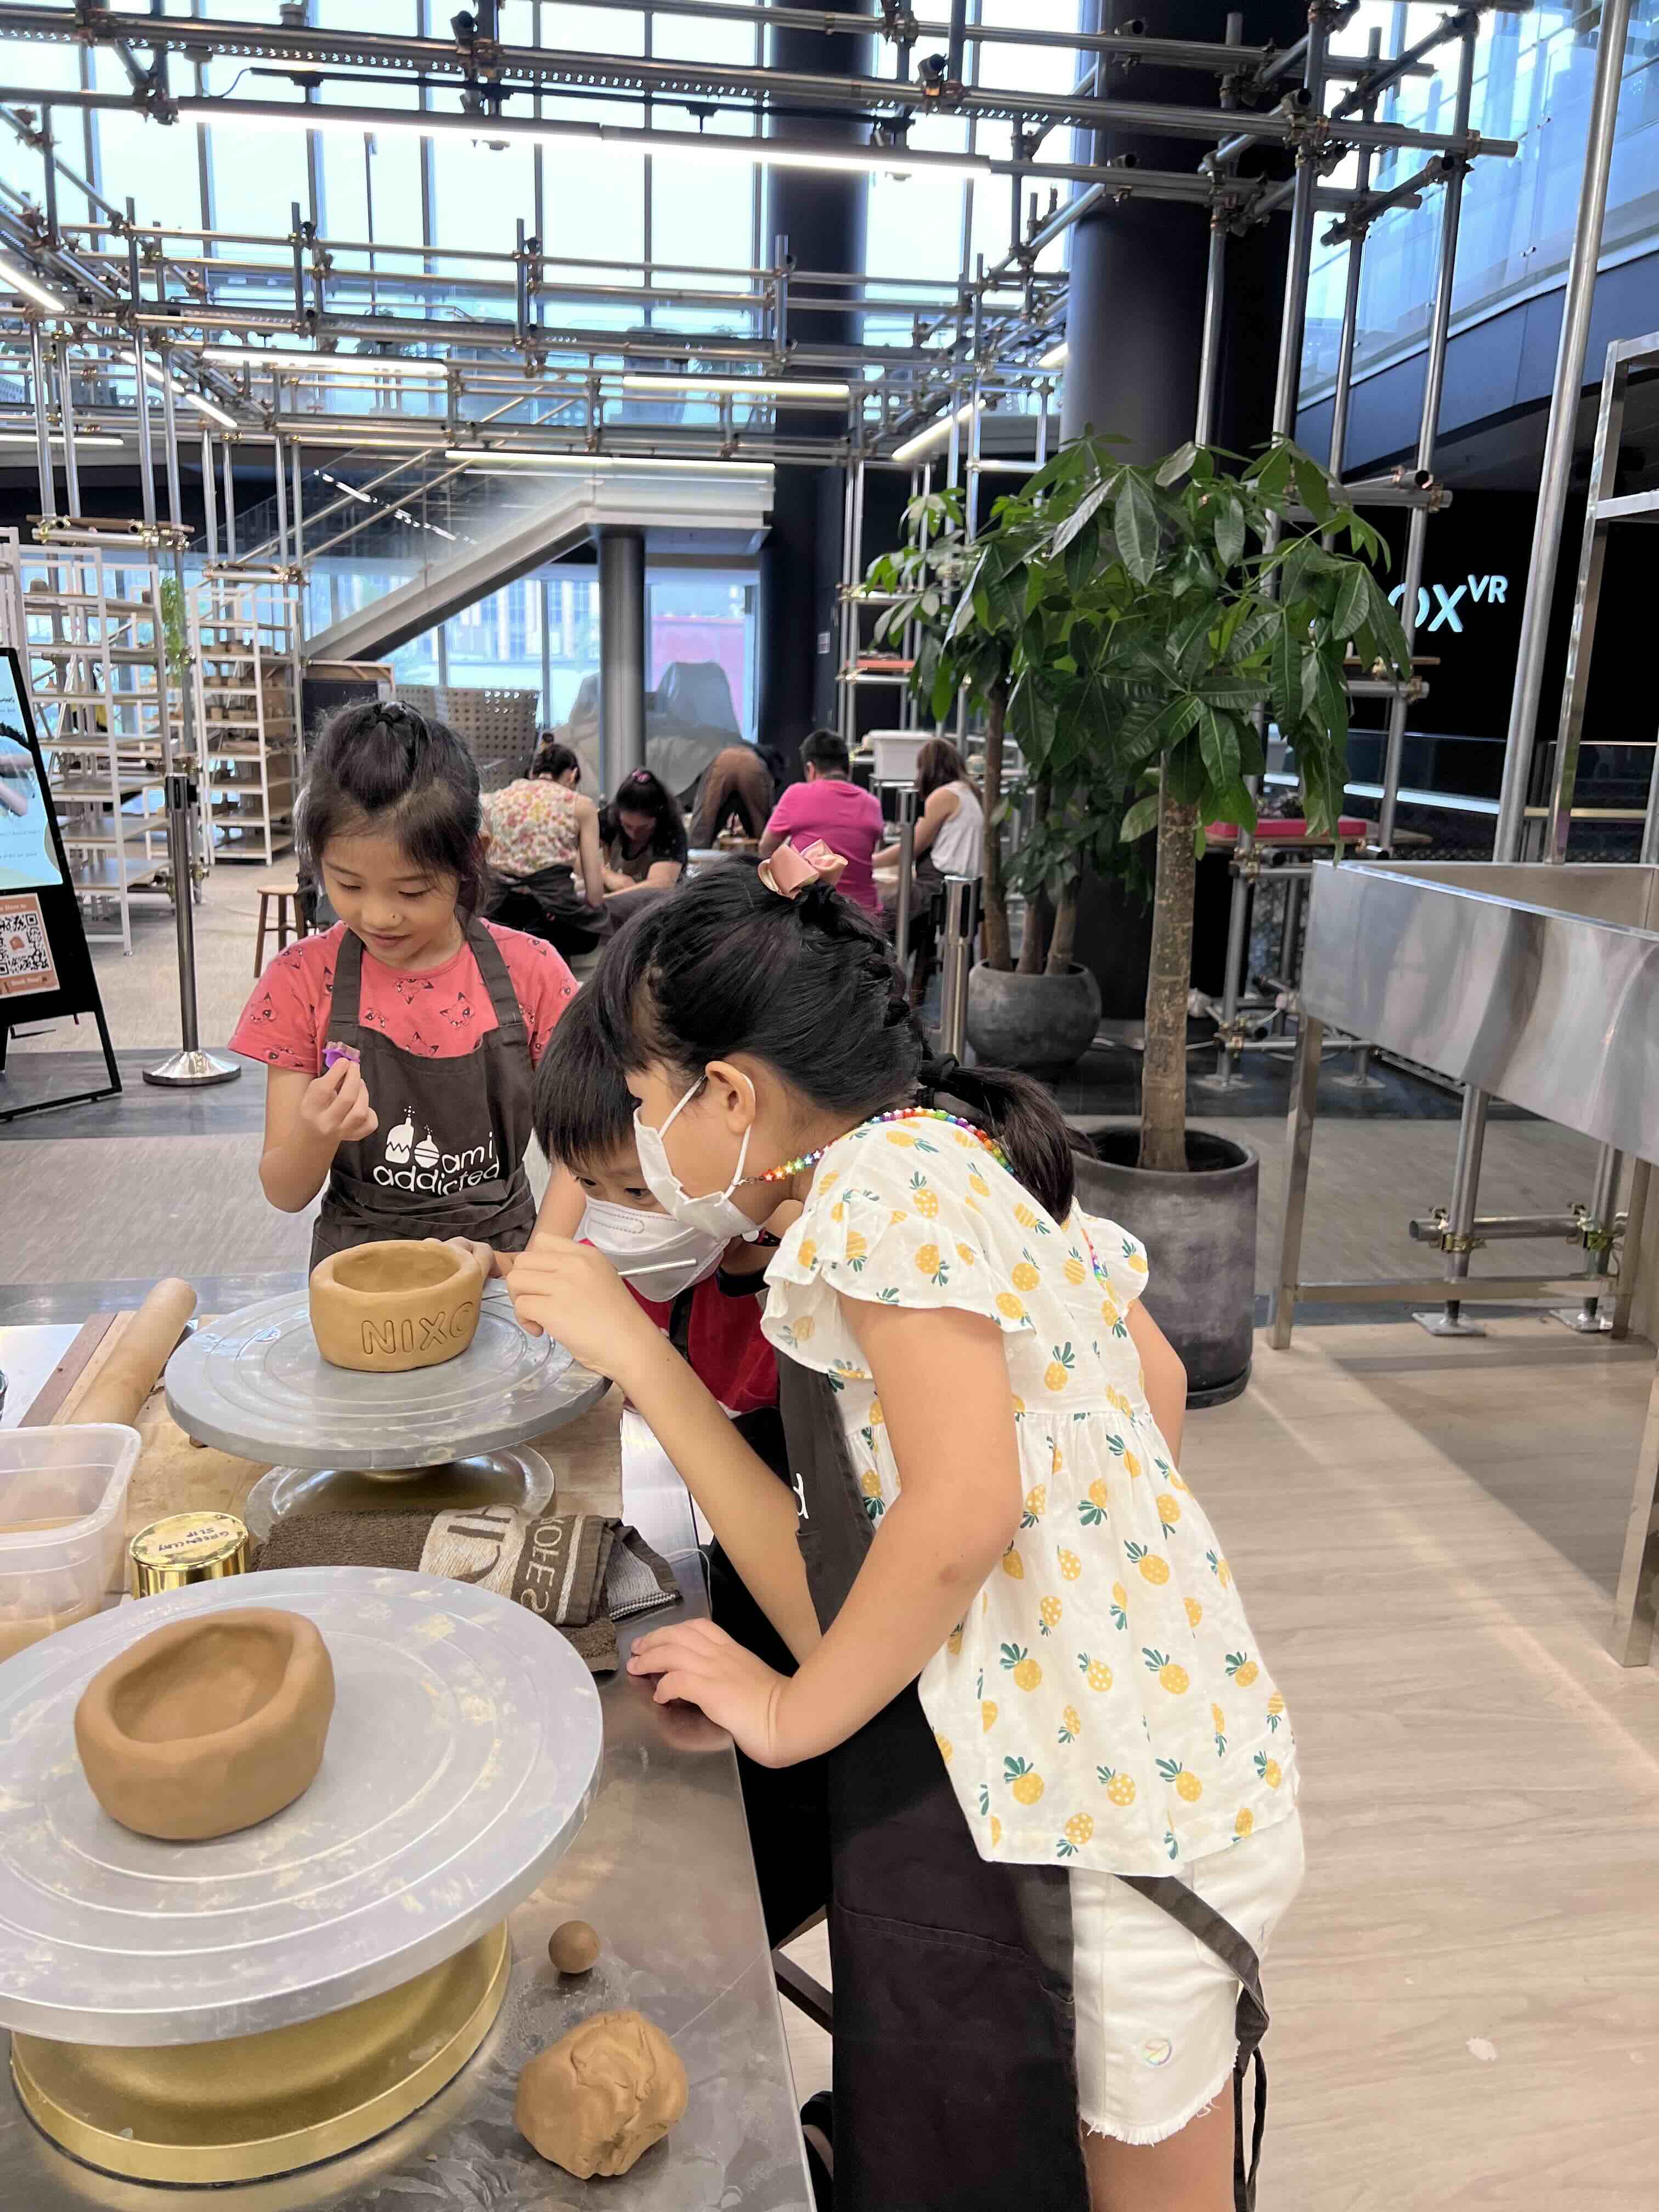 The Benefits of Pottery to Kids